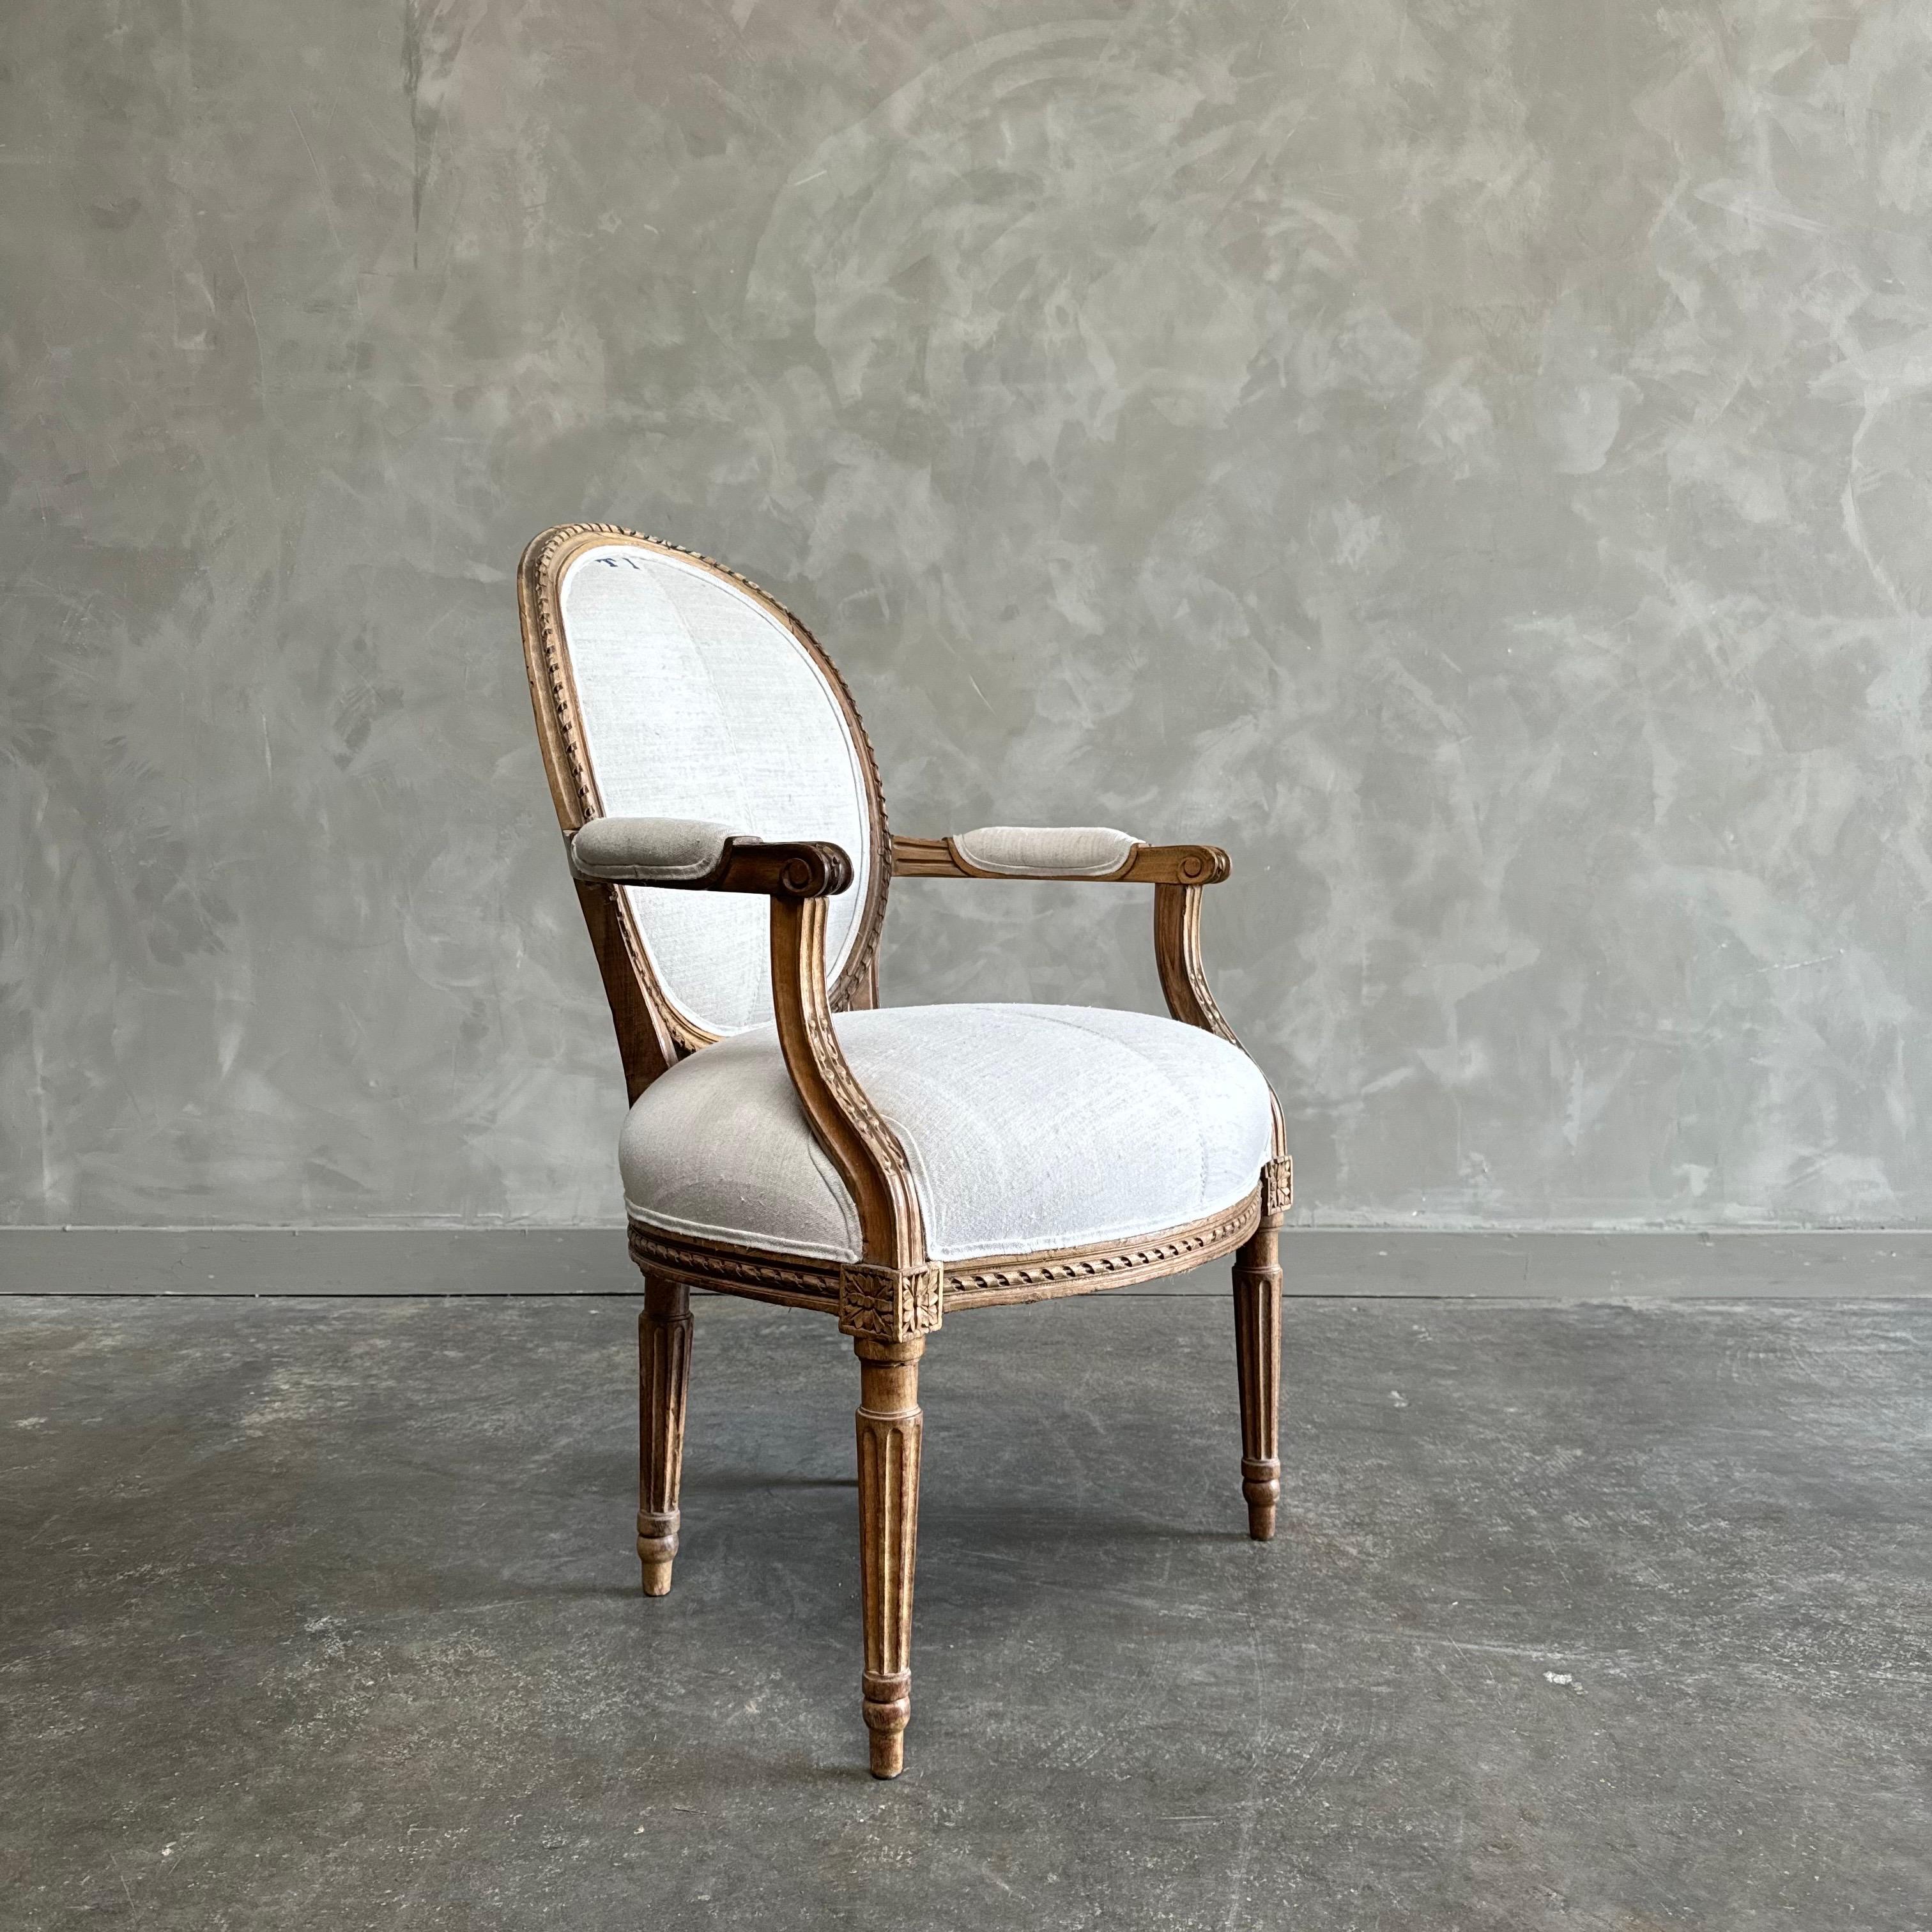 20th Century Antique Louis XVI French Open Arm chair For Sale